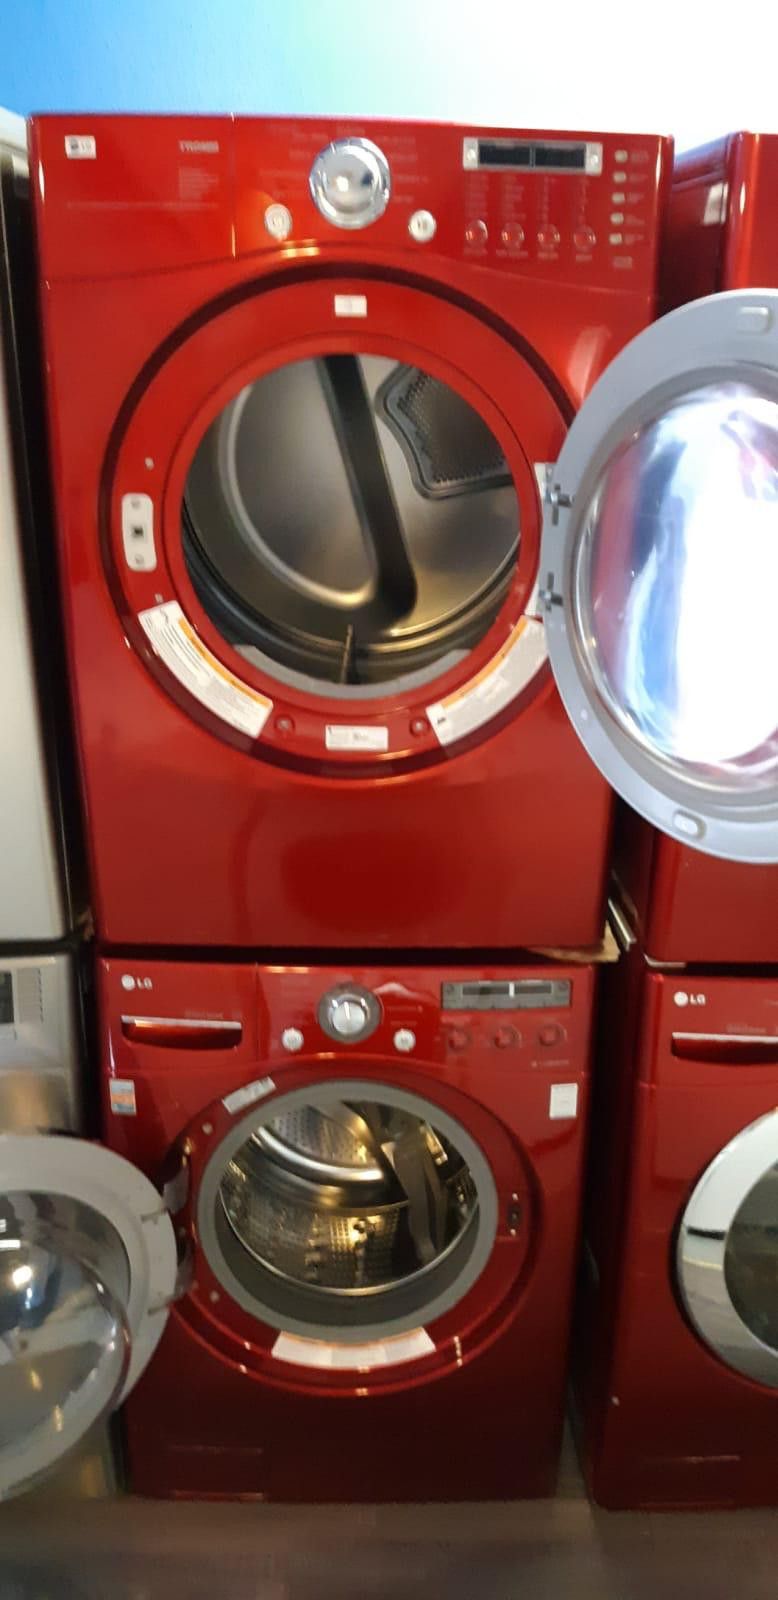 LG front load washer and dryer set in excellent condition